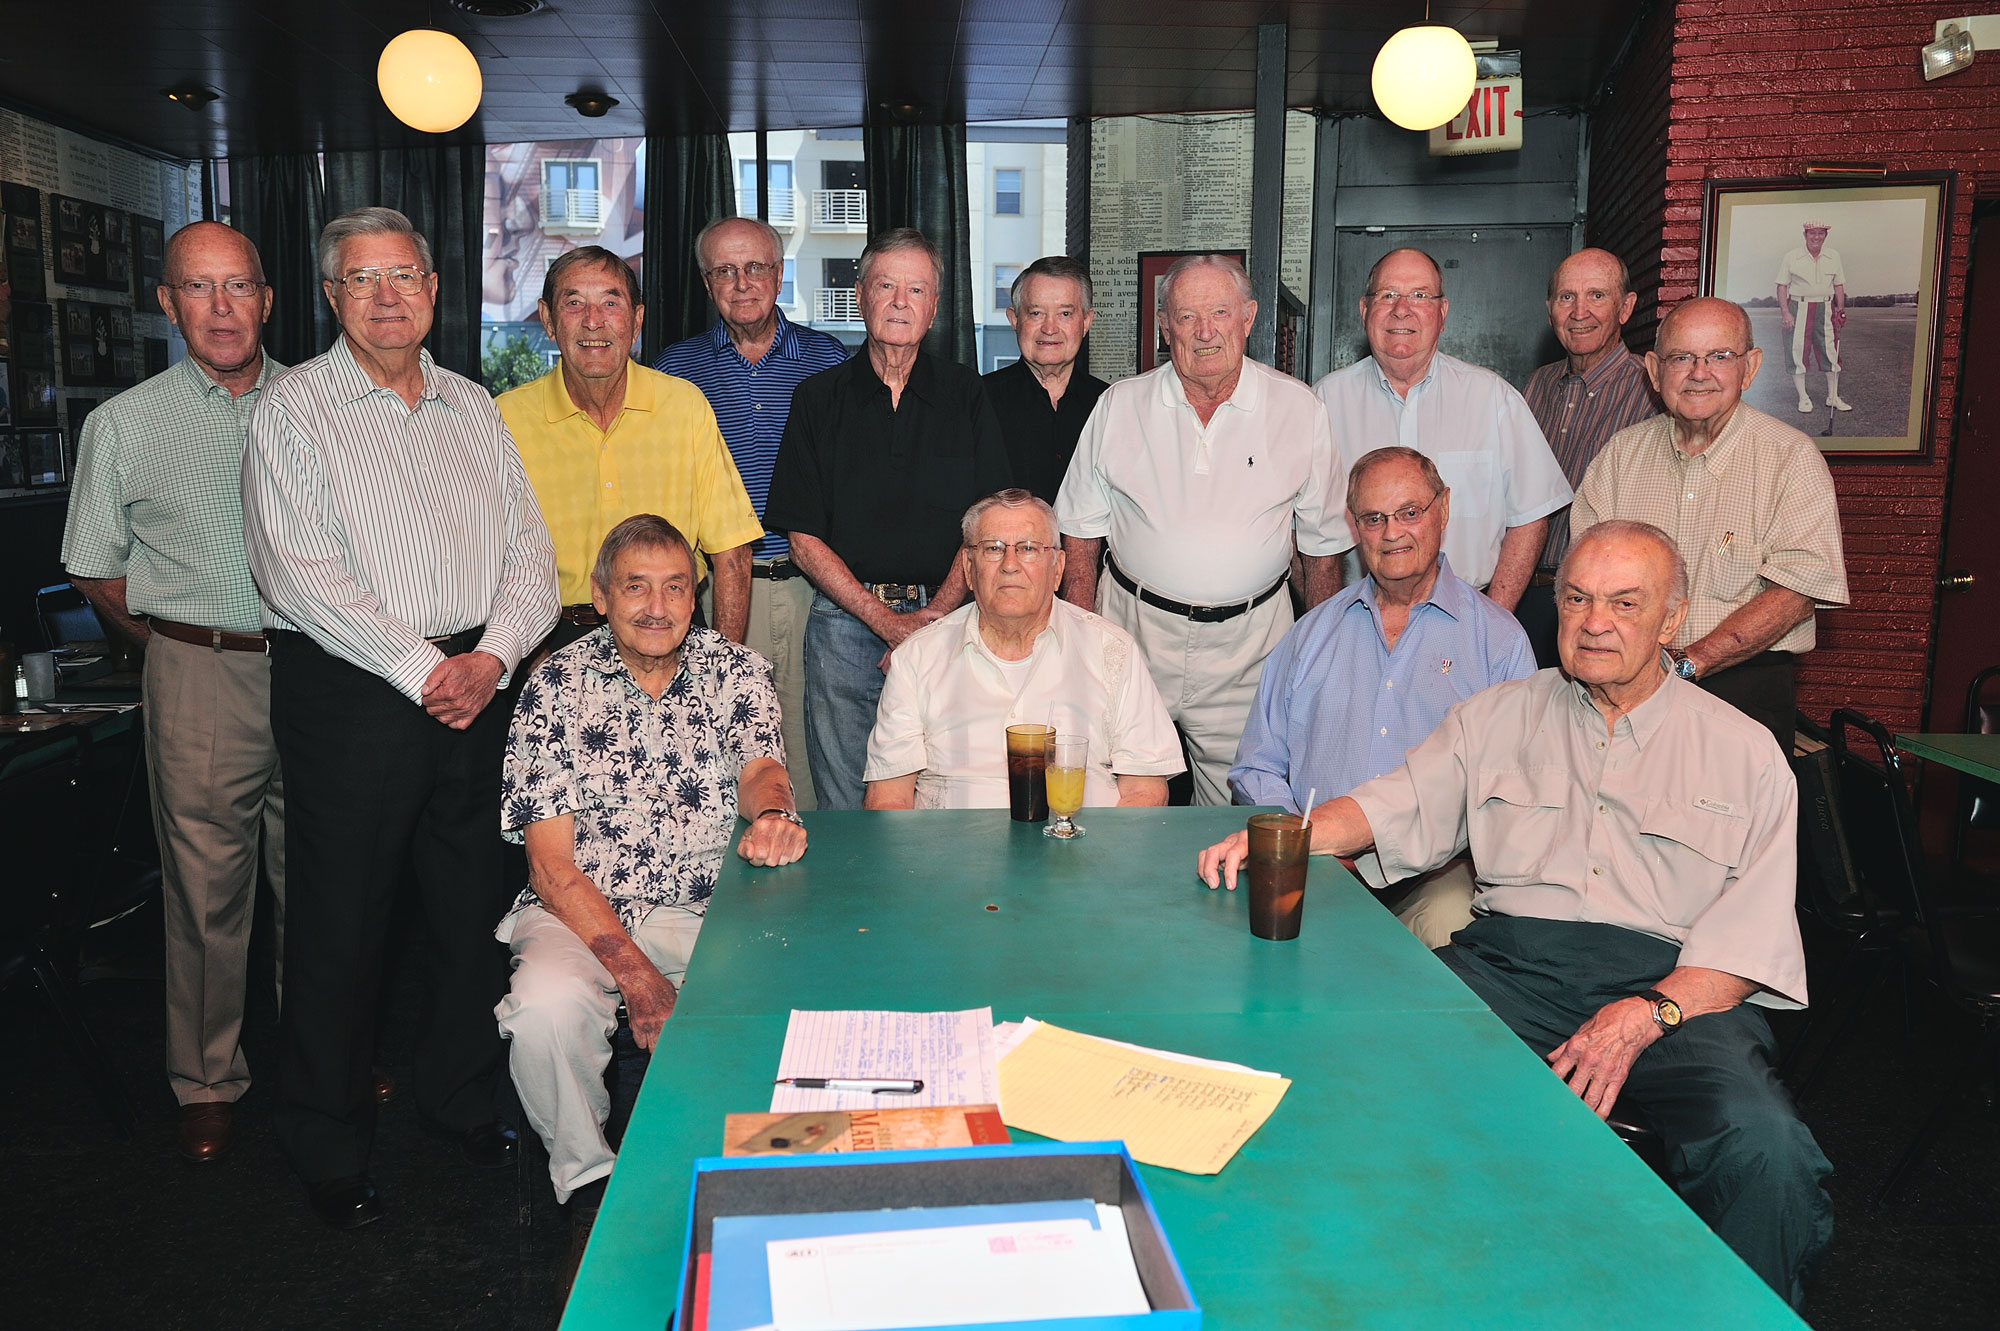 Talons from the 1940s and '50s got together in July to share stories at Campisi's Egyptian Lounge in Dallas.